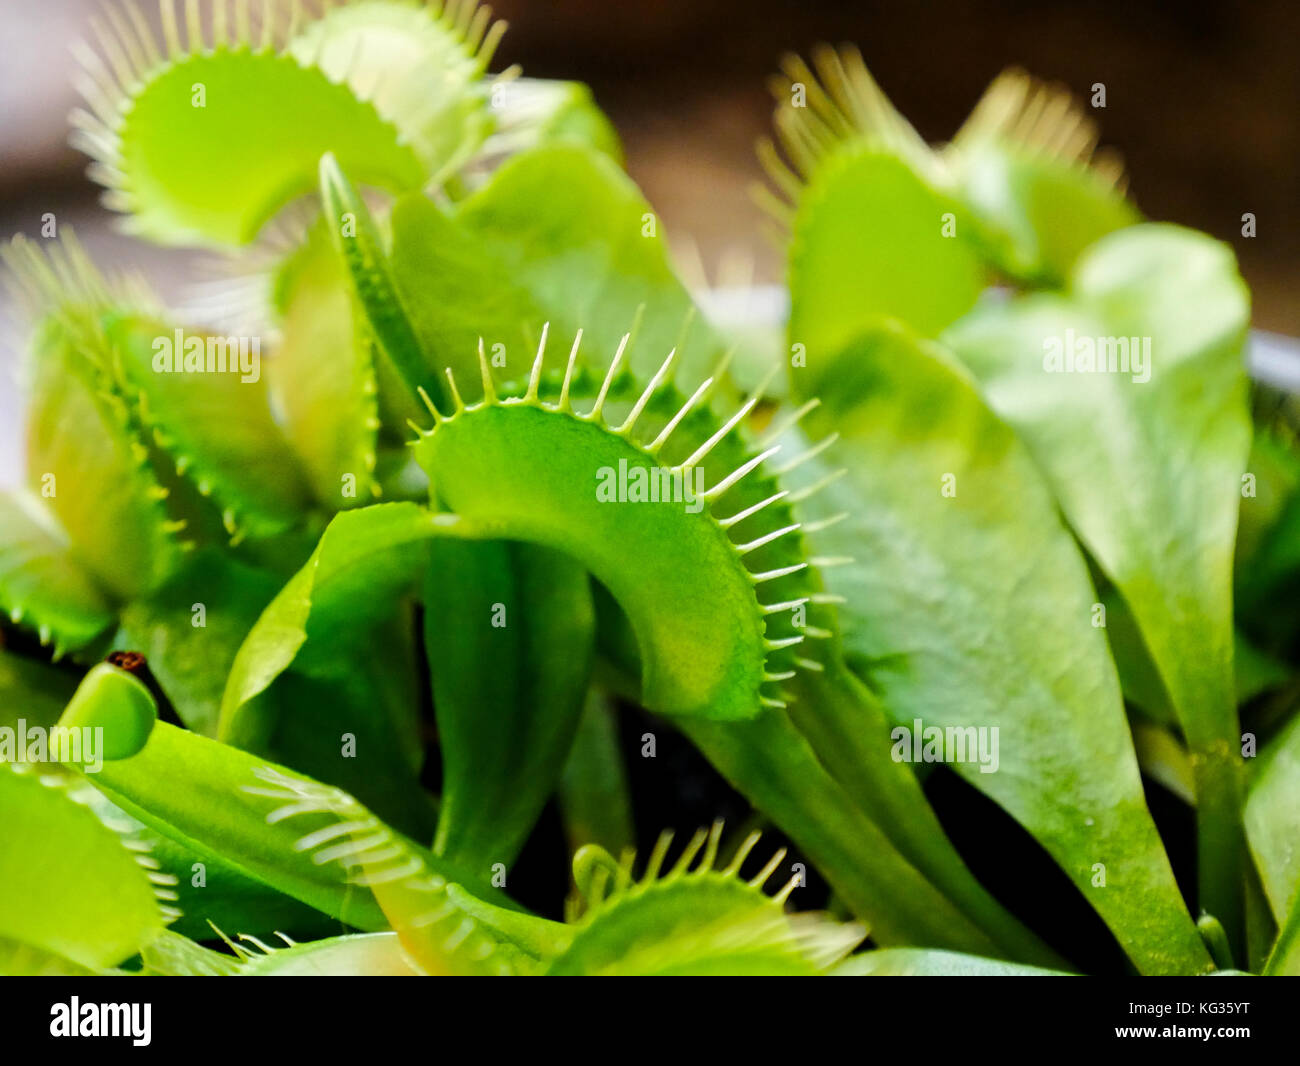 A bright green carnivorous plant. Flower catches small animals with a sharp trap. Stock Photo